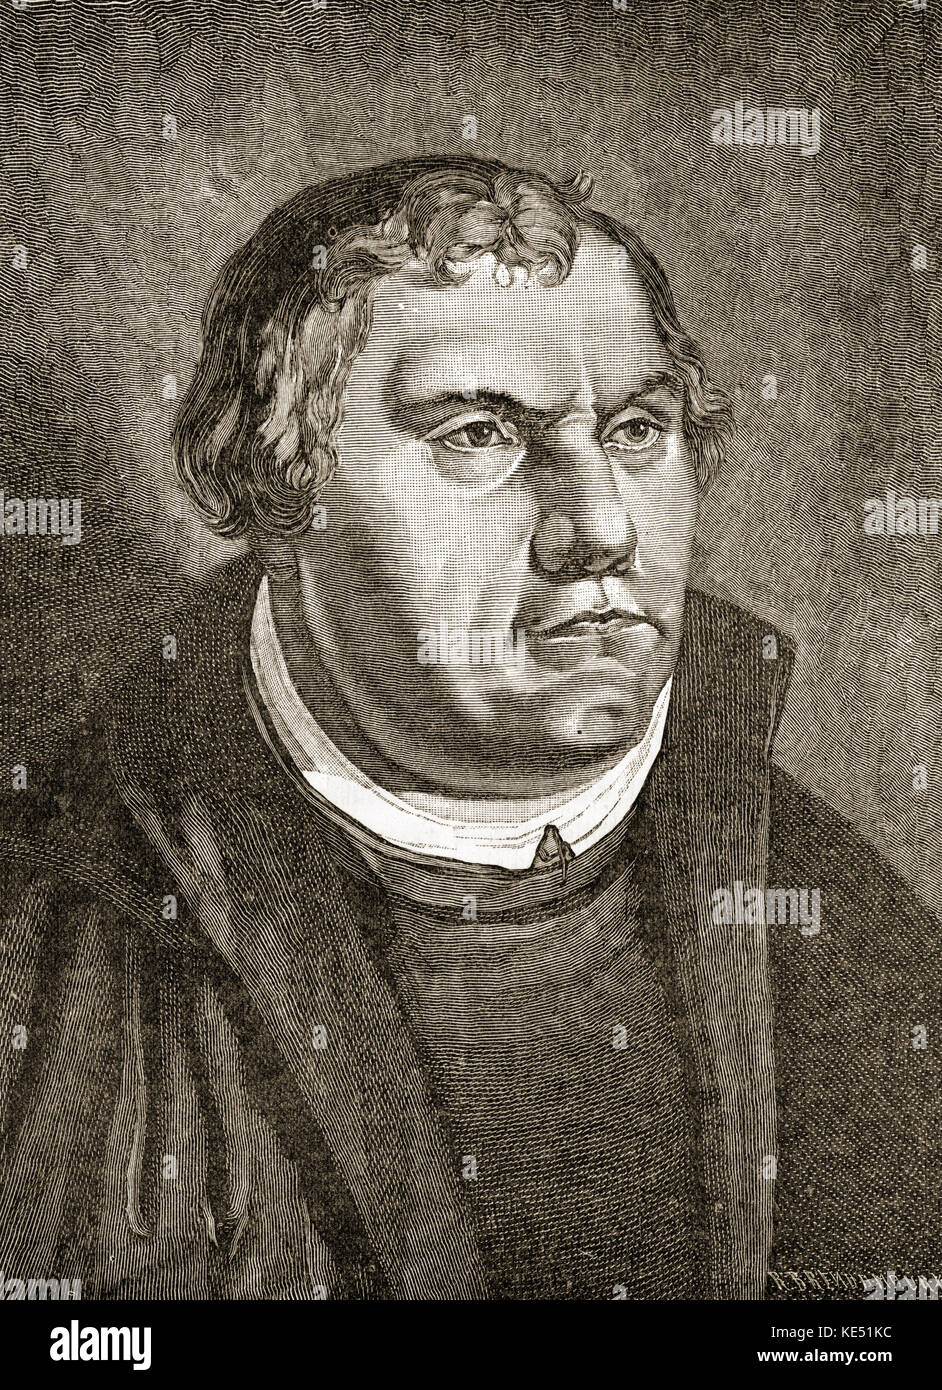 Martin Luther - portrait of the German composer and church reformer. After a painting by Lucas Cranach. ML: 10 November 1483 - 18 February 1546. ML was also a monk, priest, professor, and theologian. Stock Photo